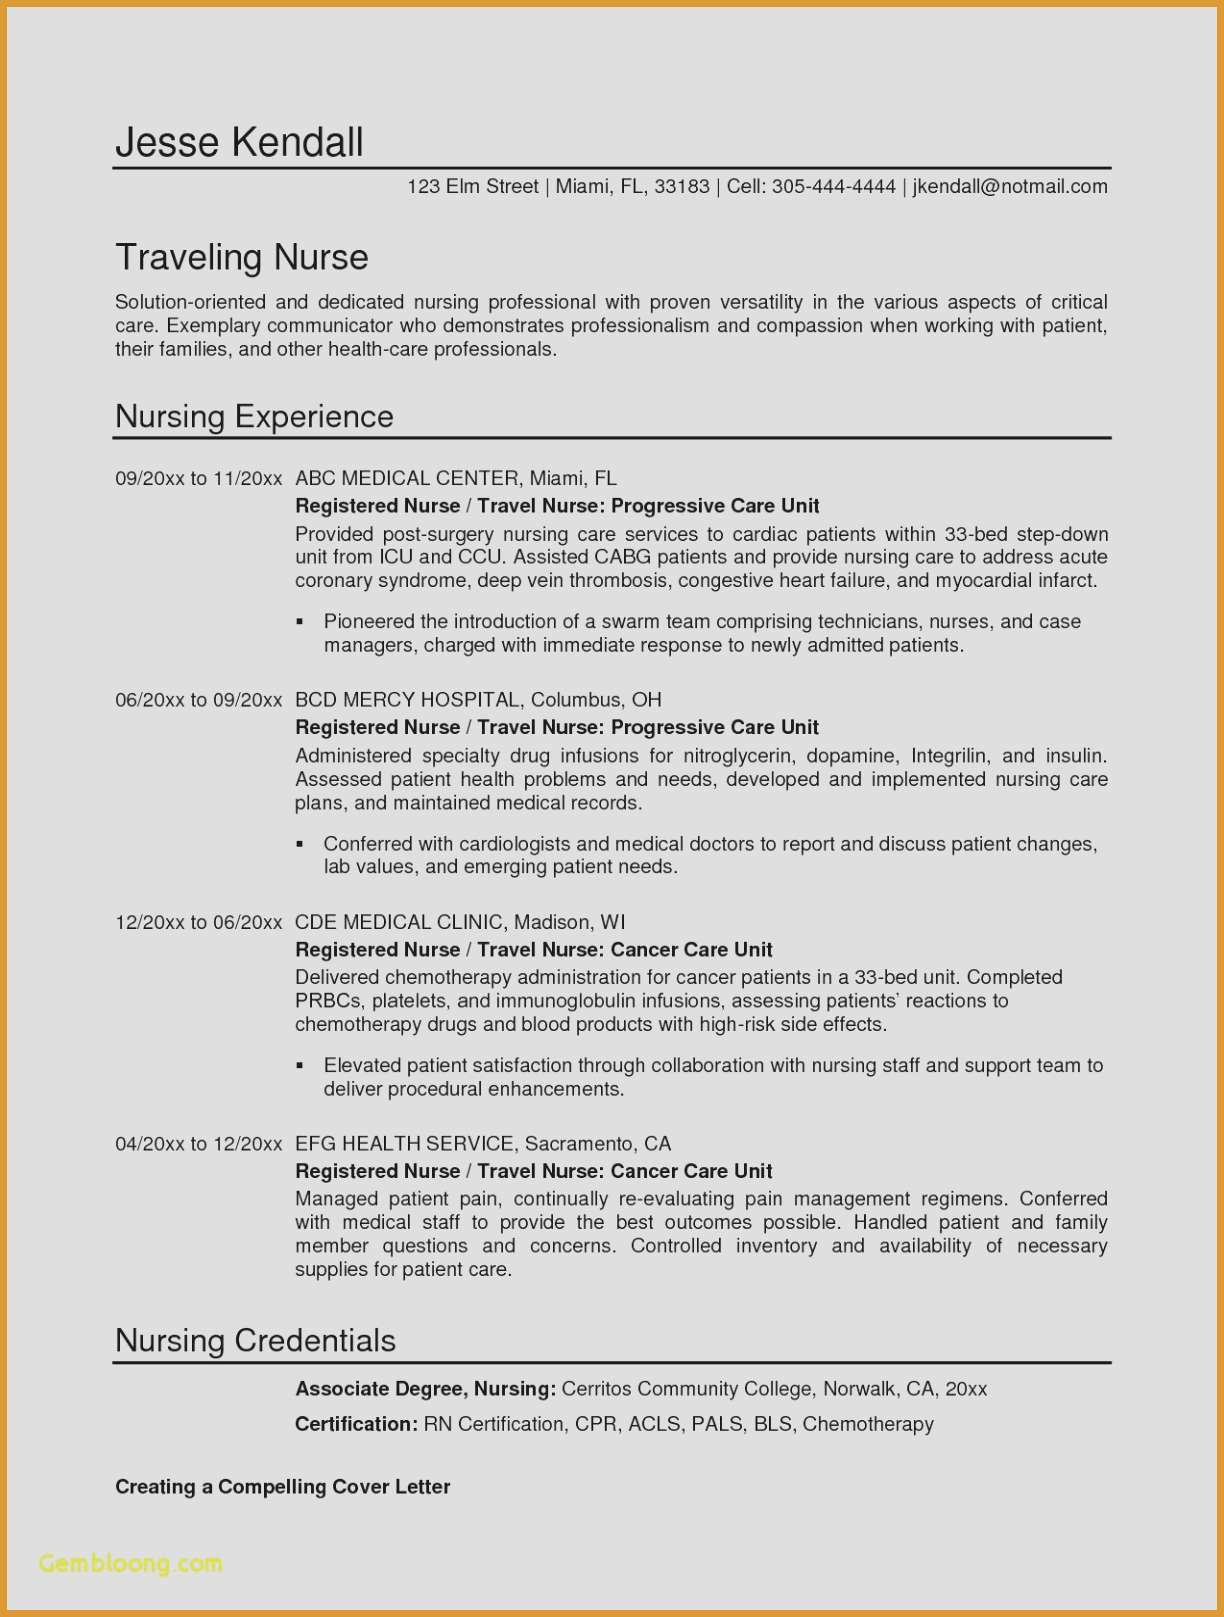 Letter Of Collaboration Template - Artistic Resume Templates